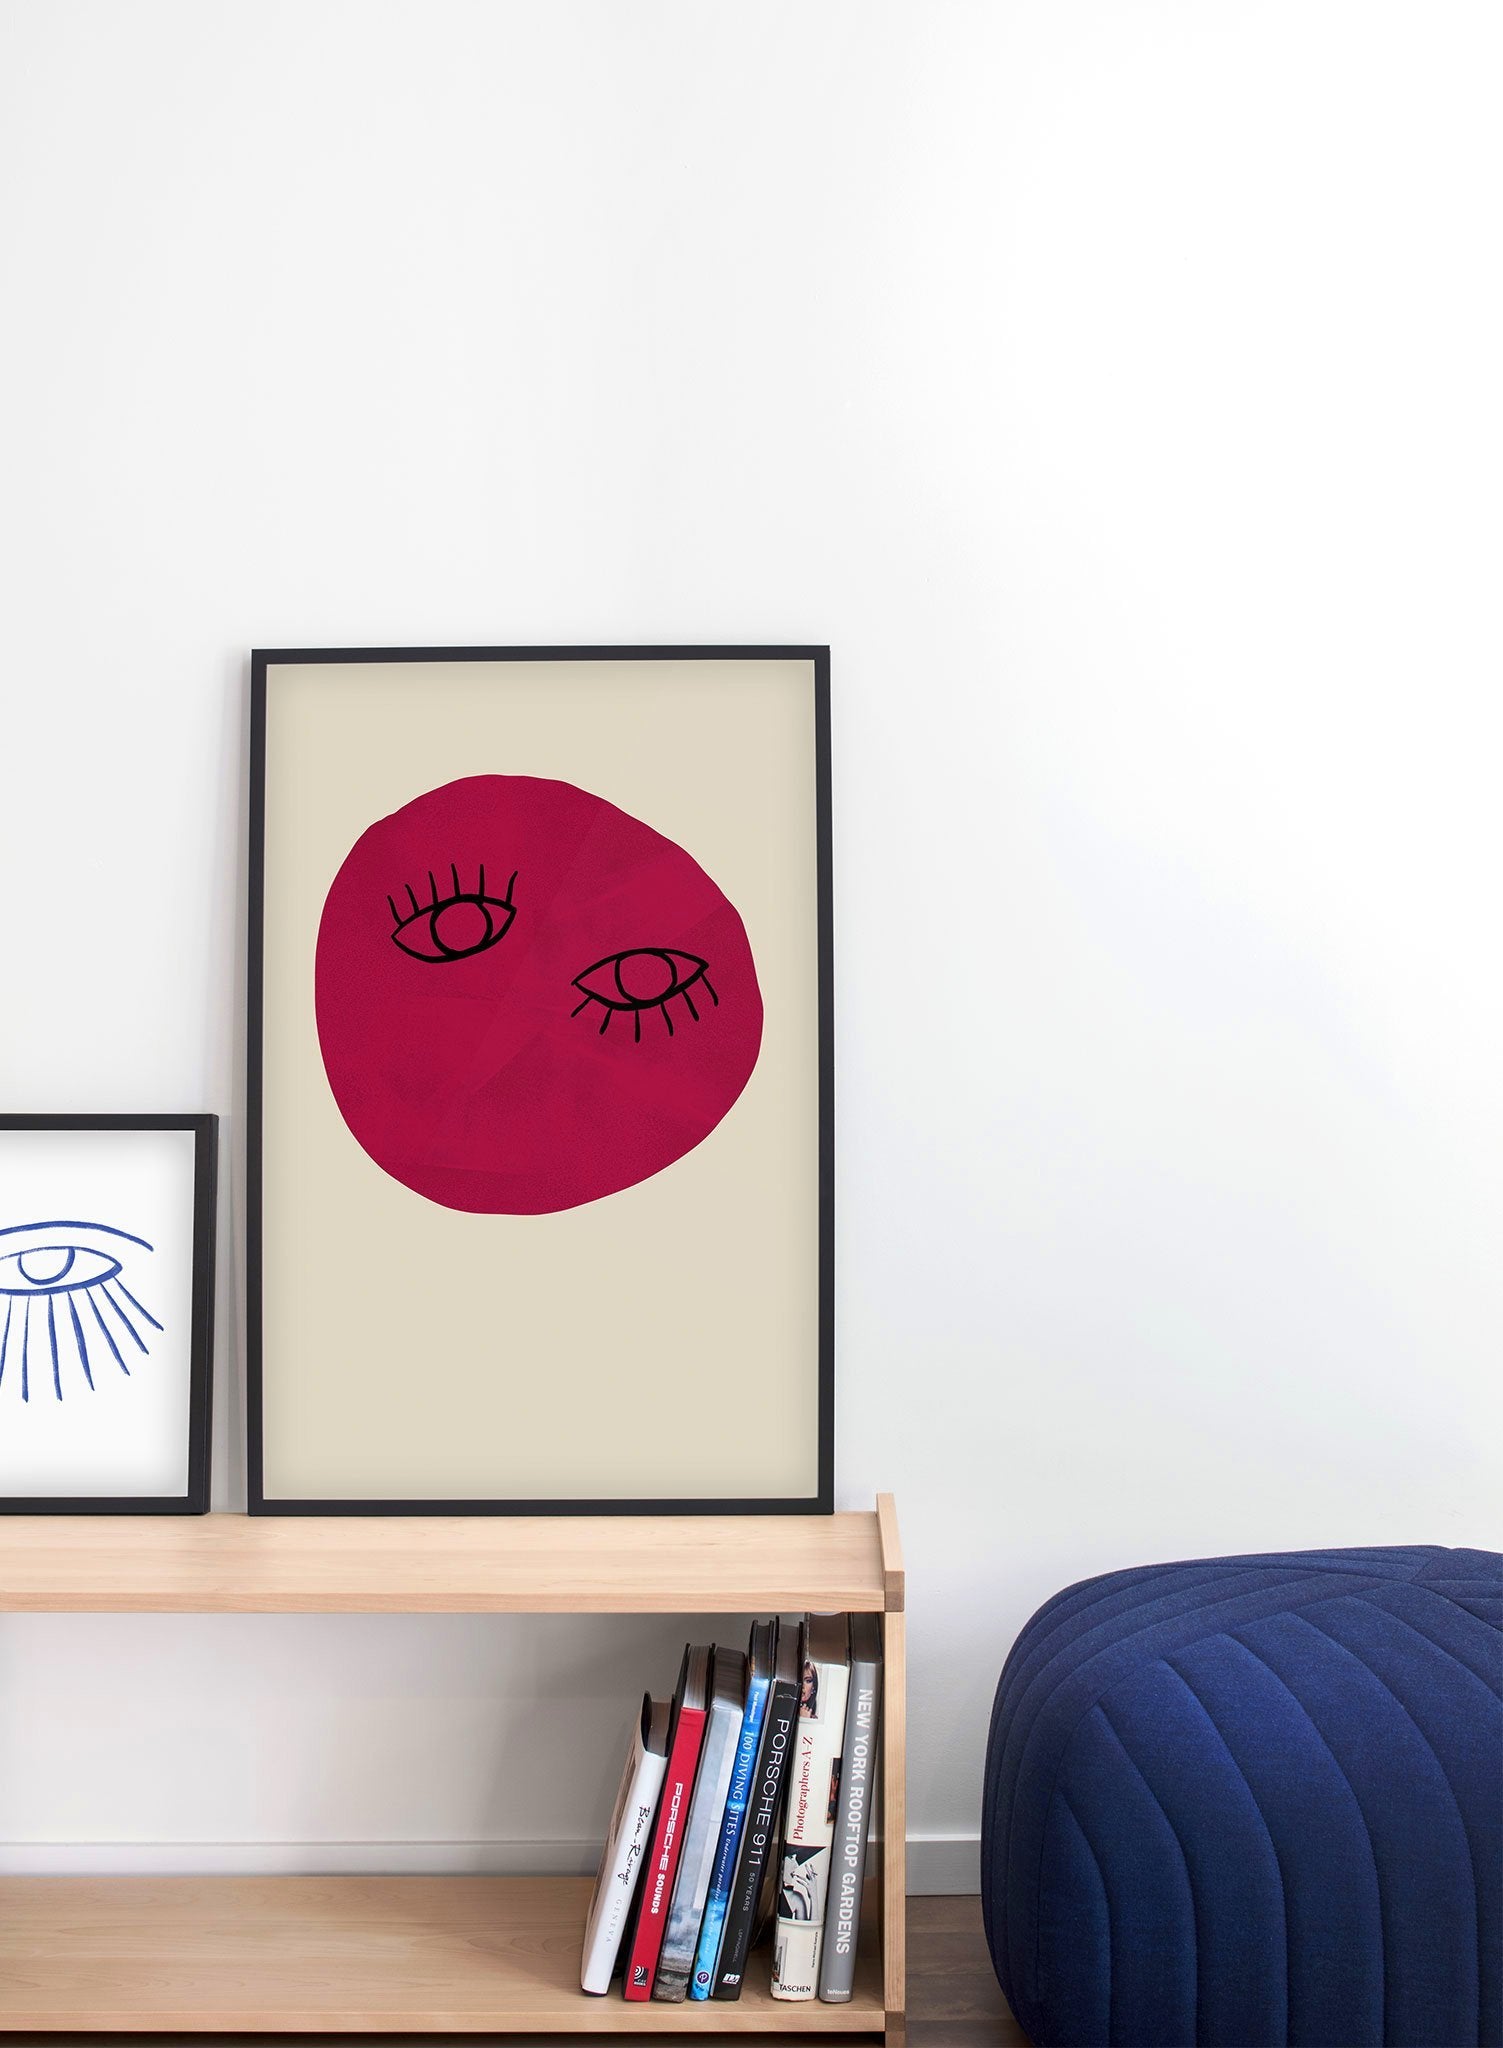 Modern minimalist poster by Opposite Wall with abstract design poster of Unconventional Beauty by Toffie Affichiste - Gallery Wall Duo - Living Room